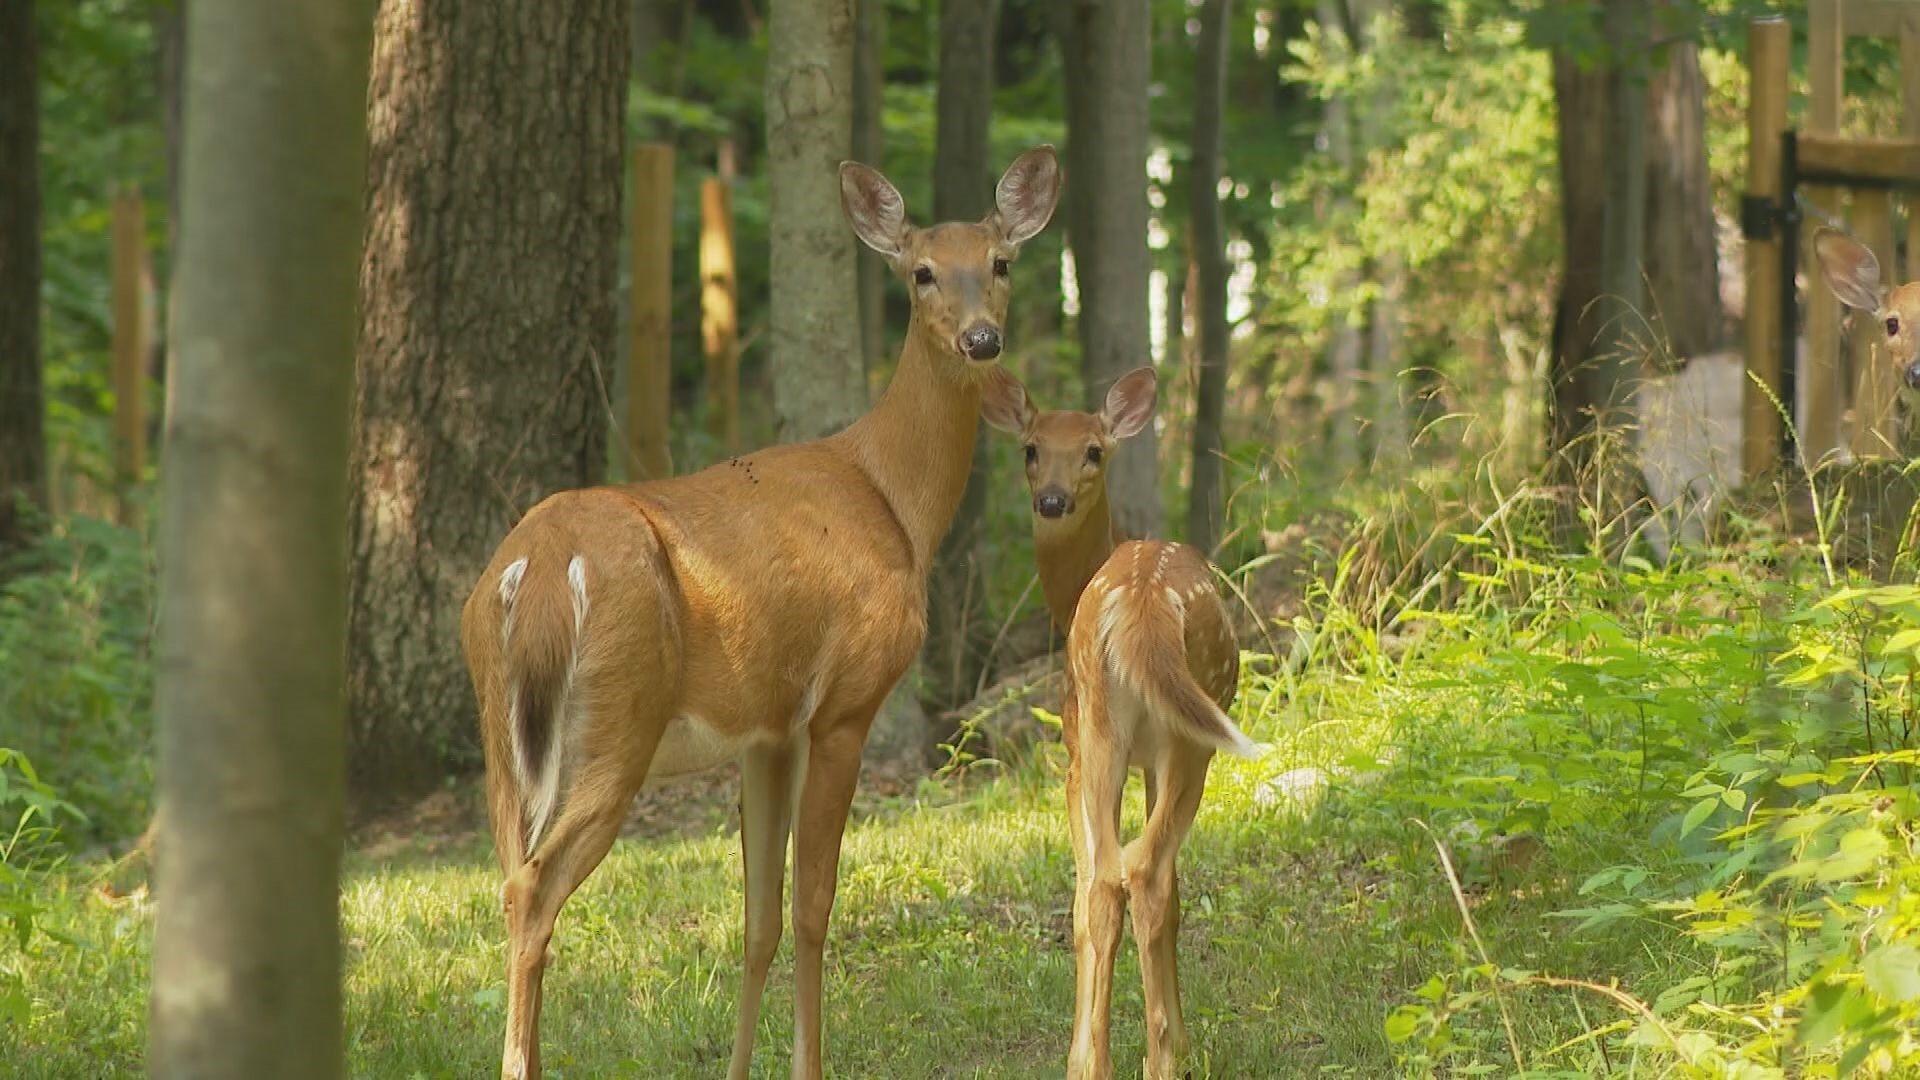 It's the Fall season, which means you may have noticed or more deer out and about.